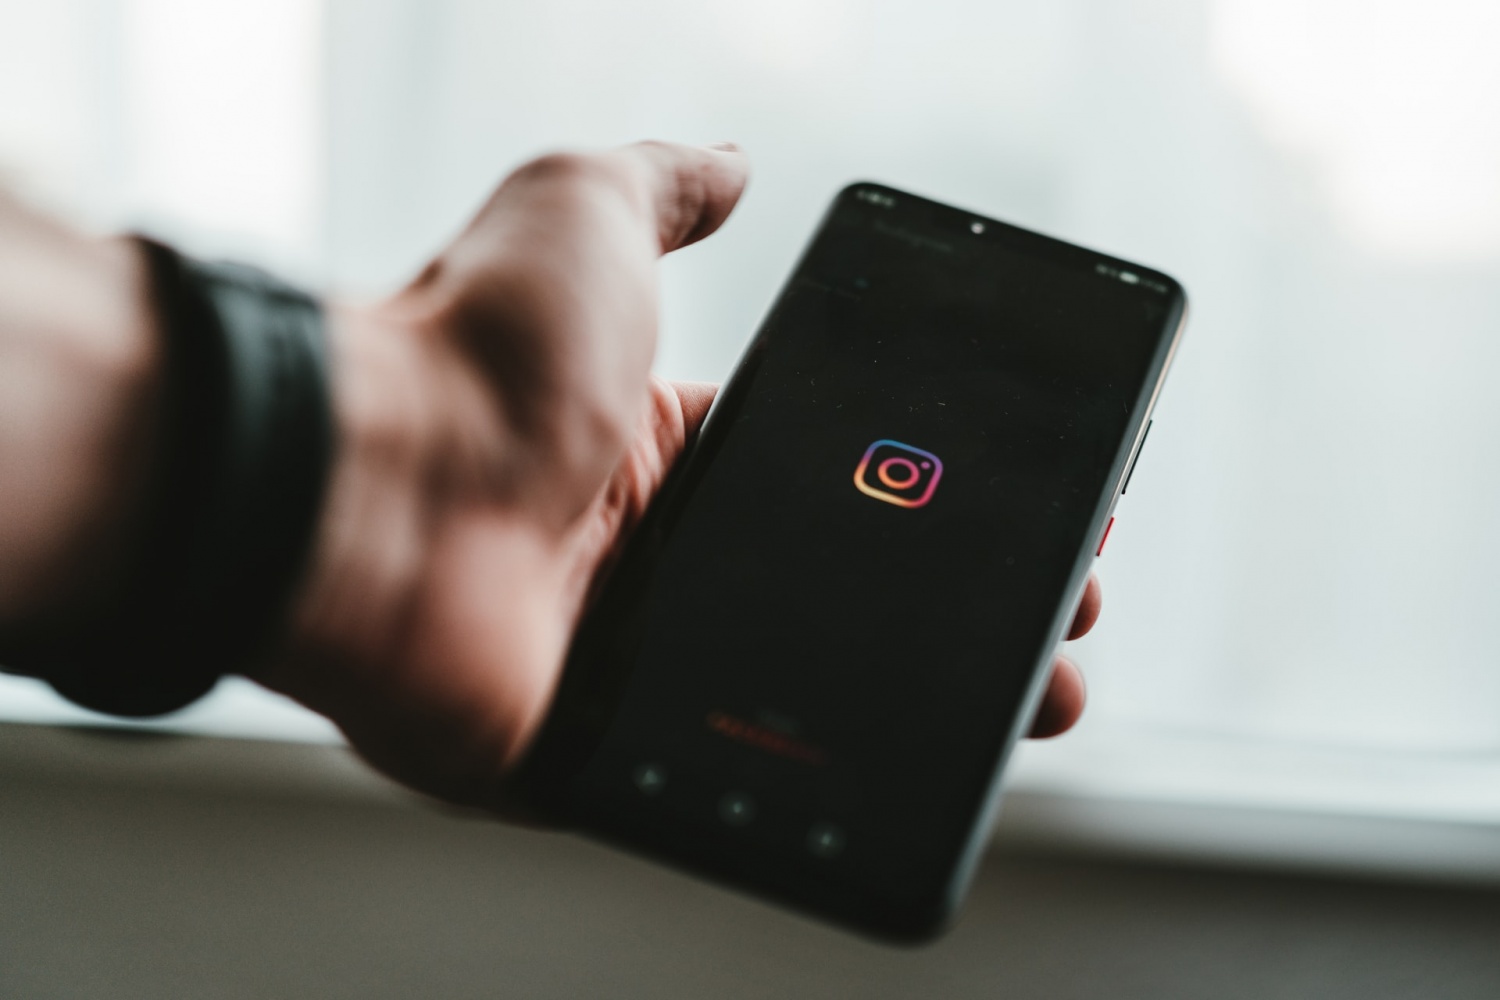 Instagram New Feature Allows Users to Dramatically Shake Their Phone to Report App Issues